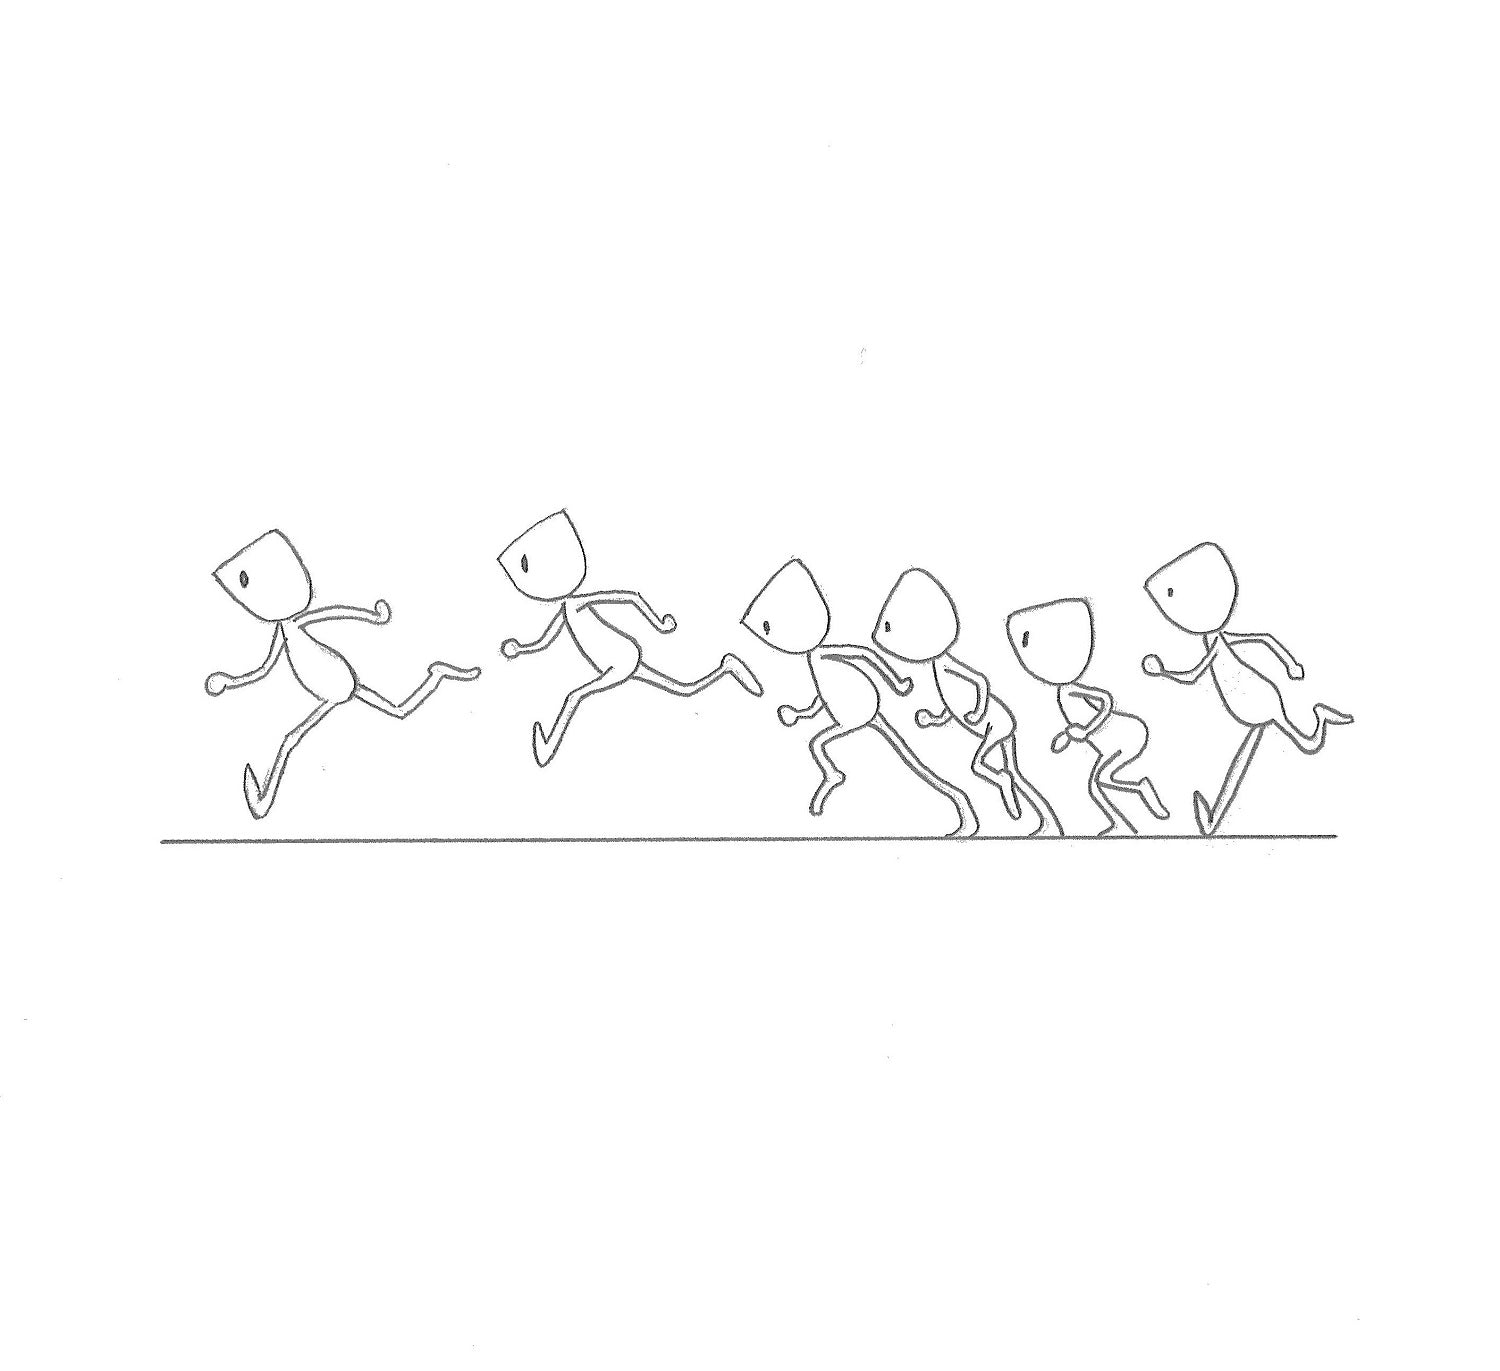 Six cartoon people in a queue about to run and jump across the ground.